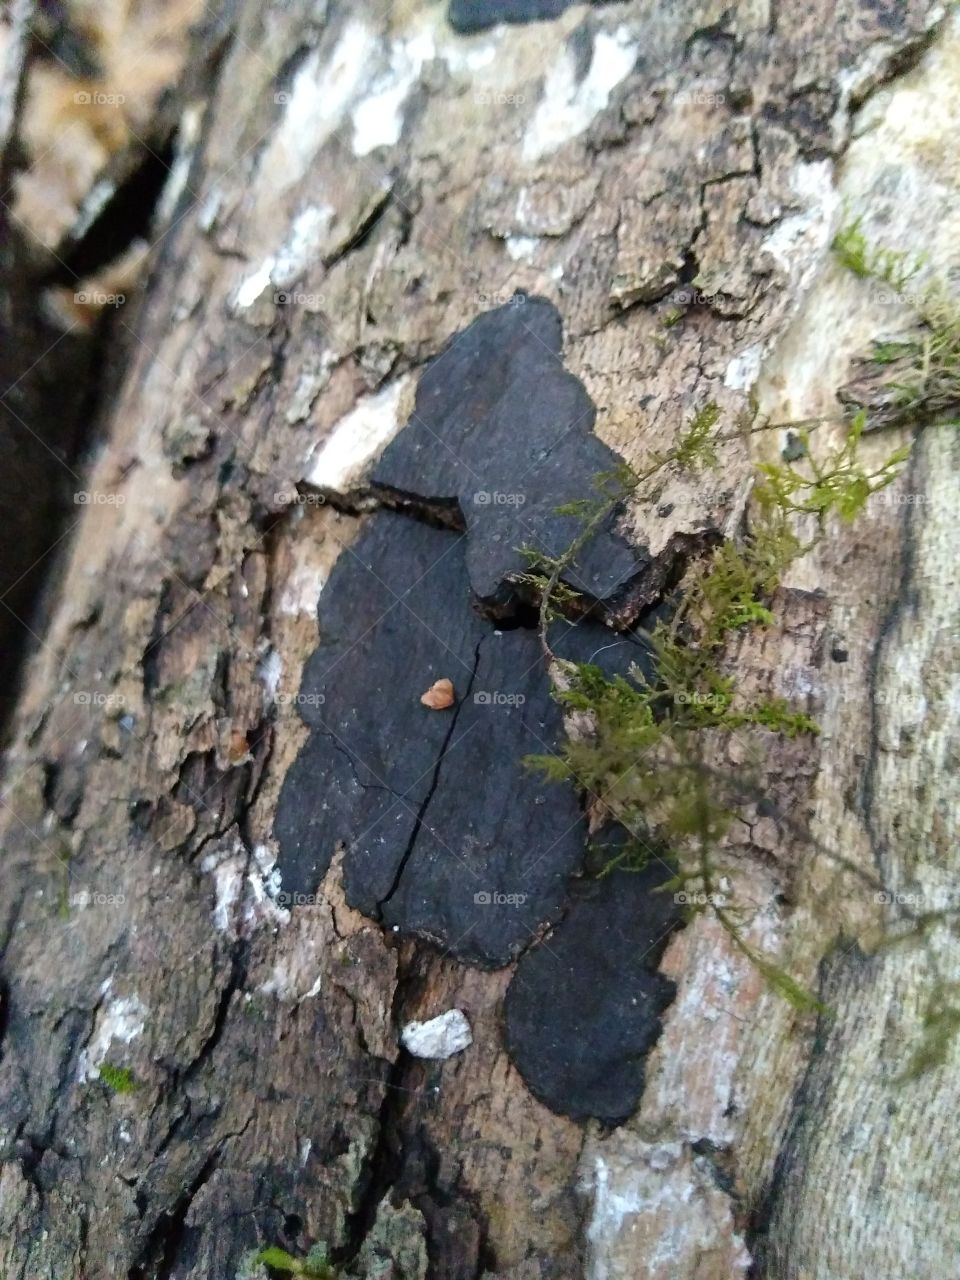 Fungus On A Decaying Tree